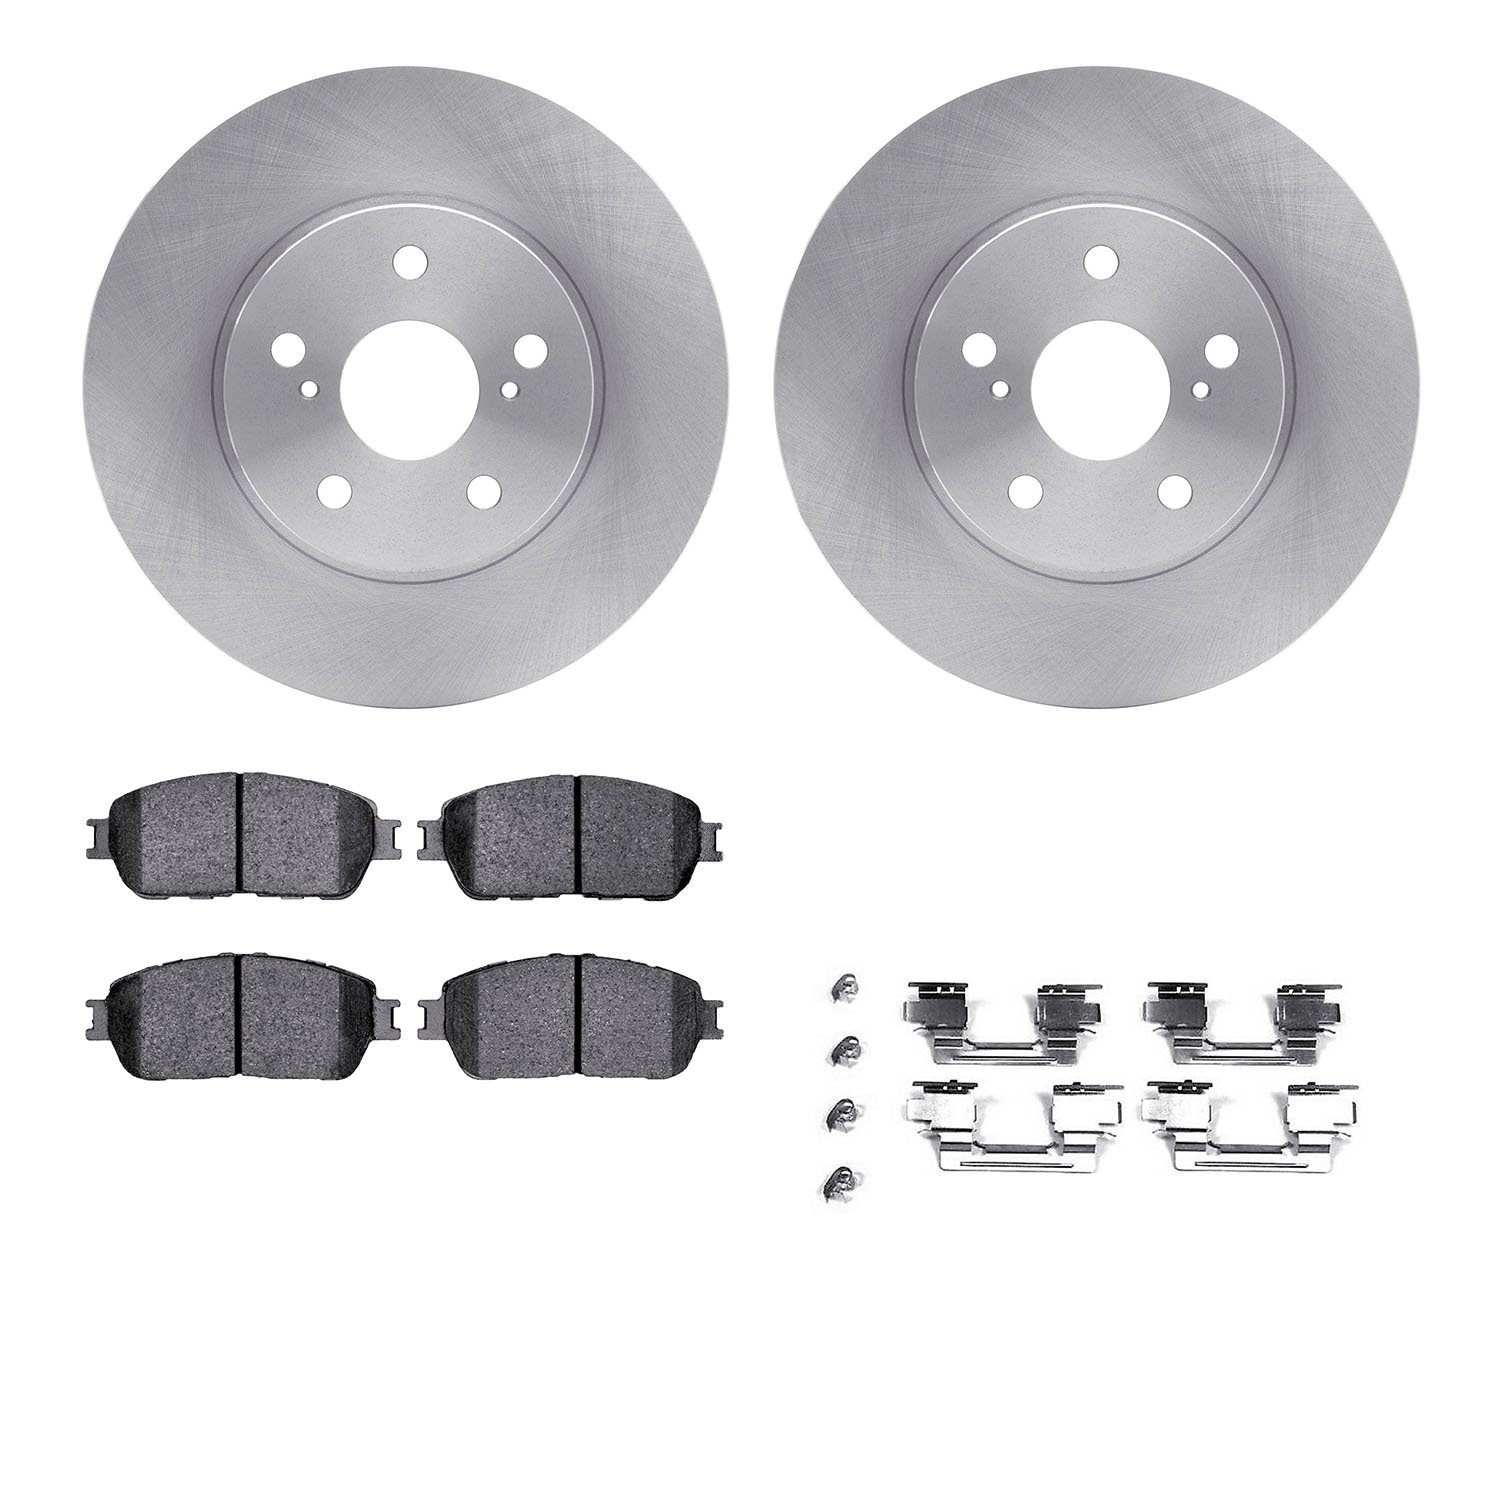 6412-76001 Brake Rotors with Ultimate-Duty Brake Pads Kit & Hardware, 2004-2010 Lexus/Toyota/Scion, Position: Front